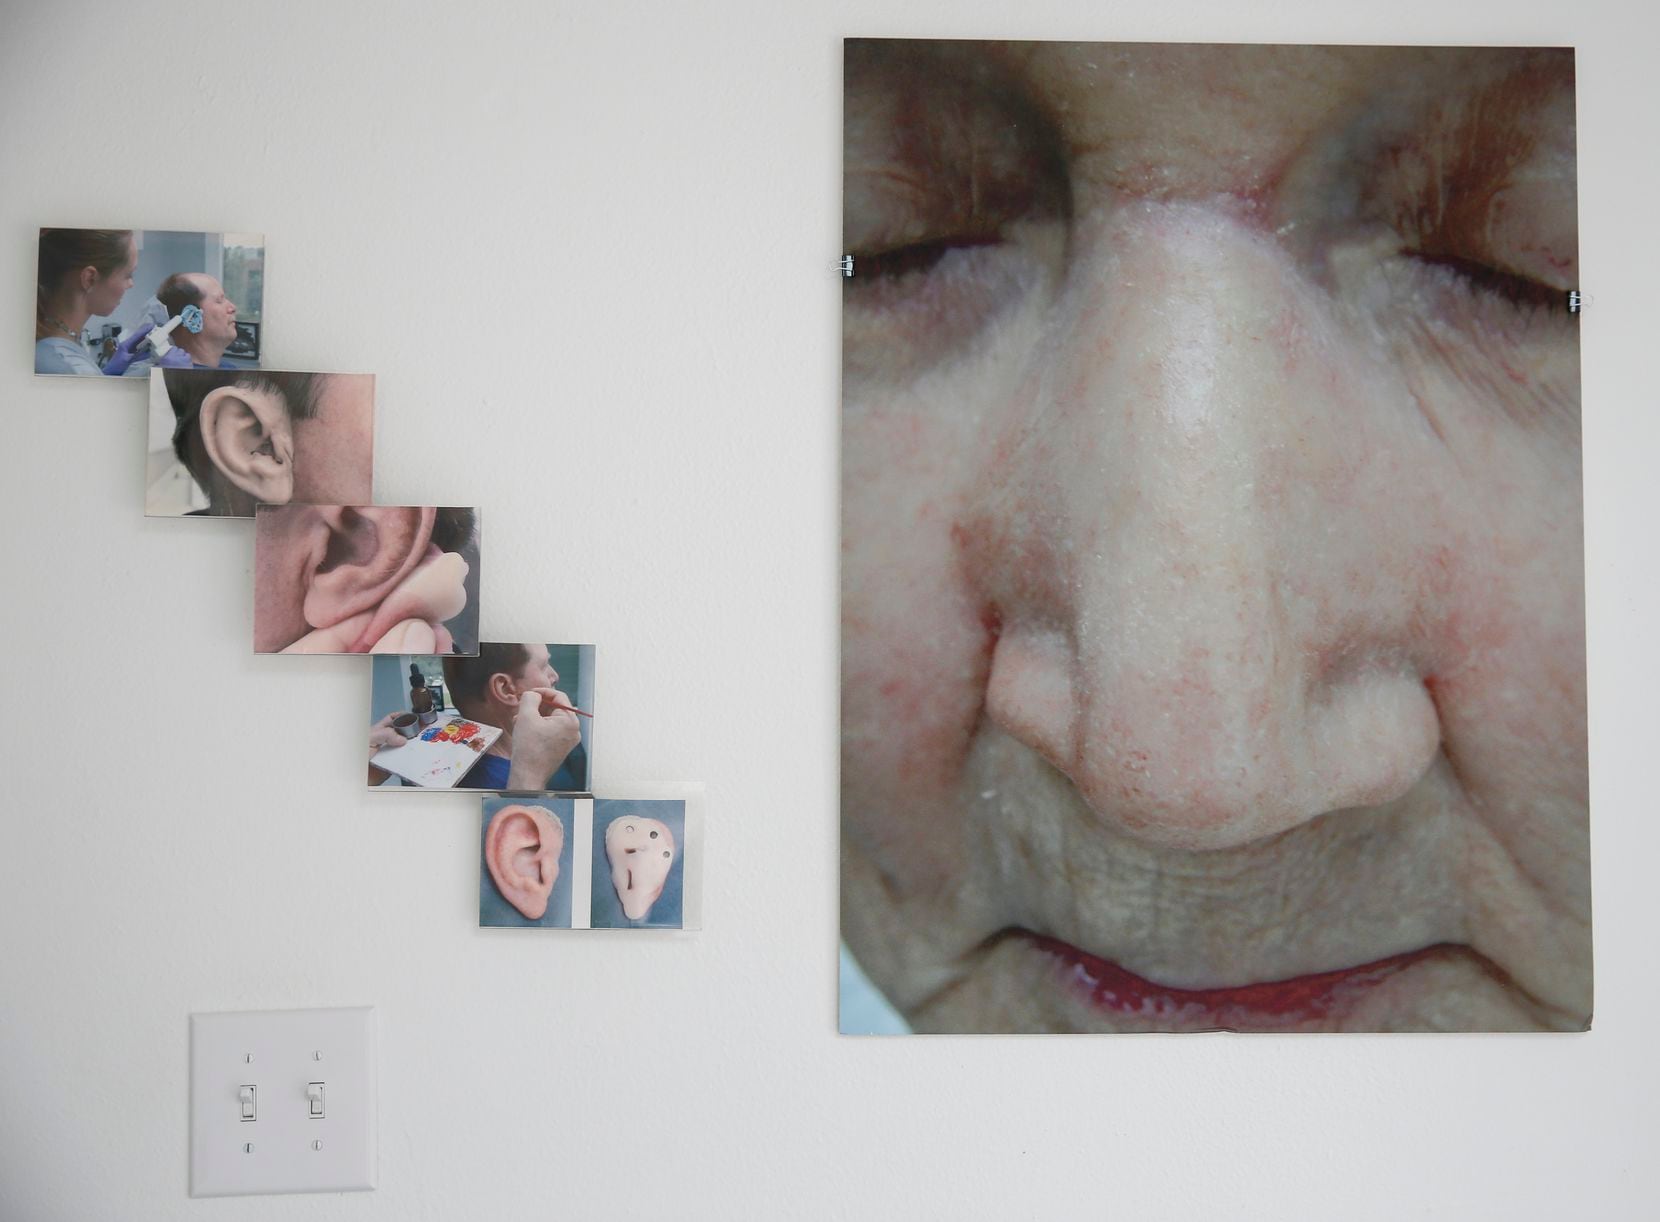 Archived photos of Mosaic Prosthetics patients hang on the wall of his offices in McKinney. 